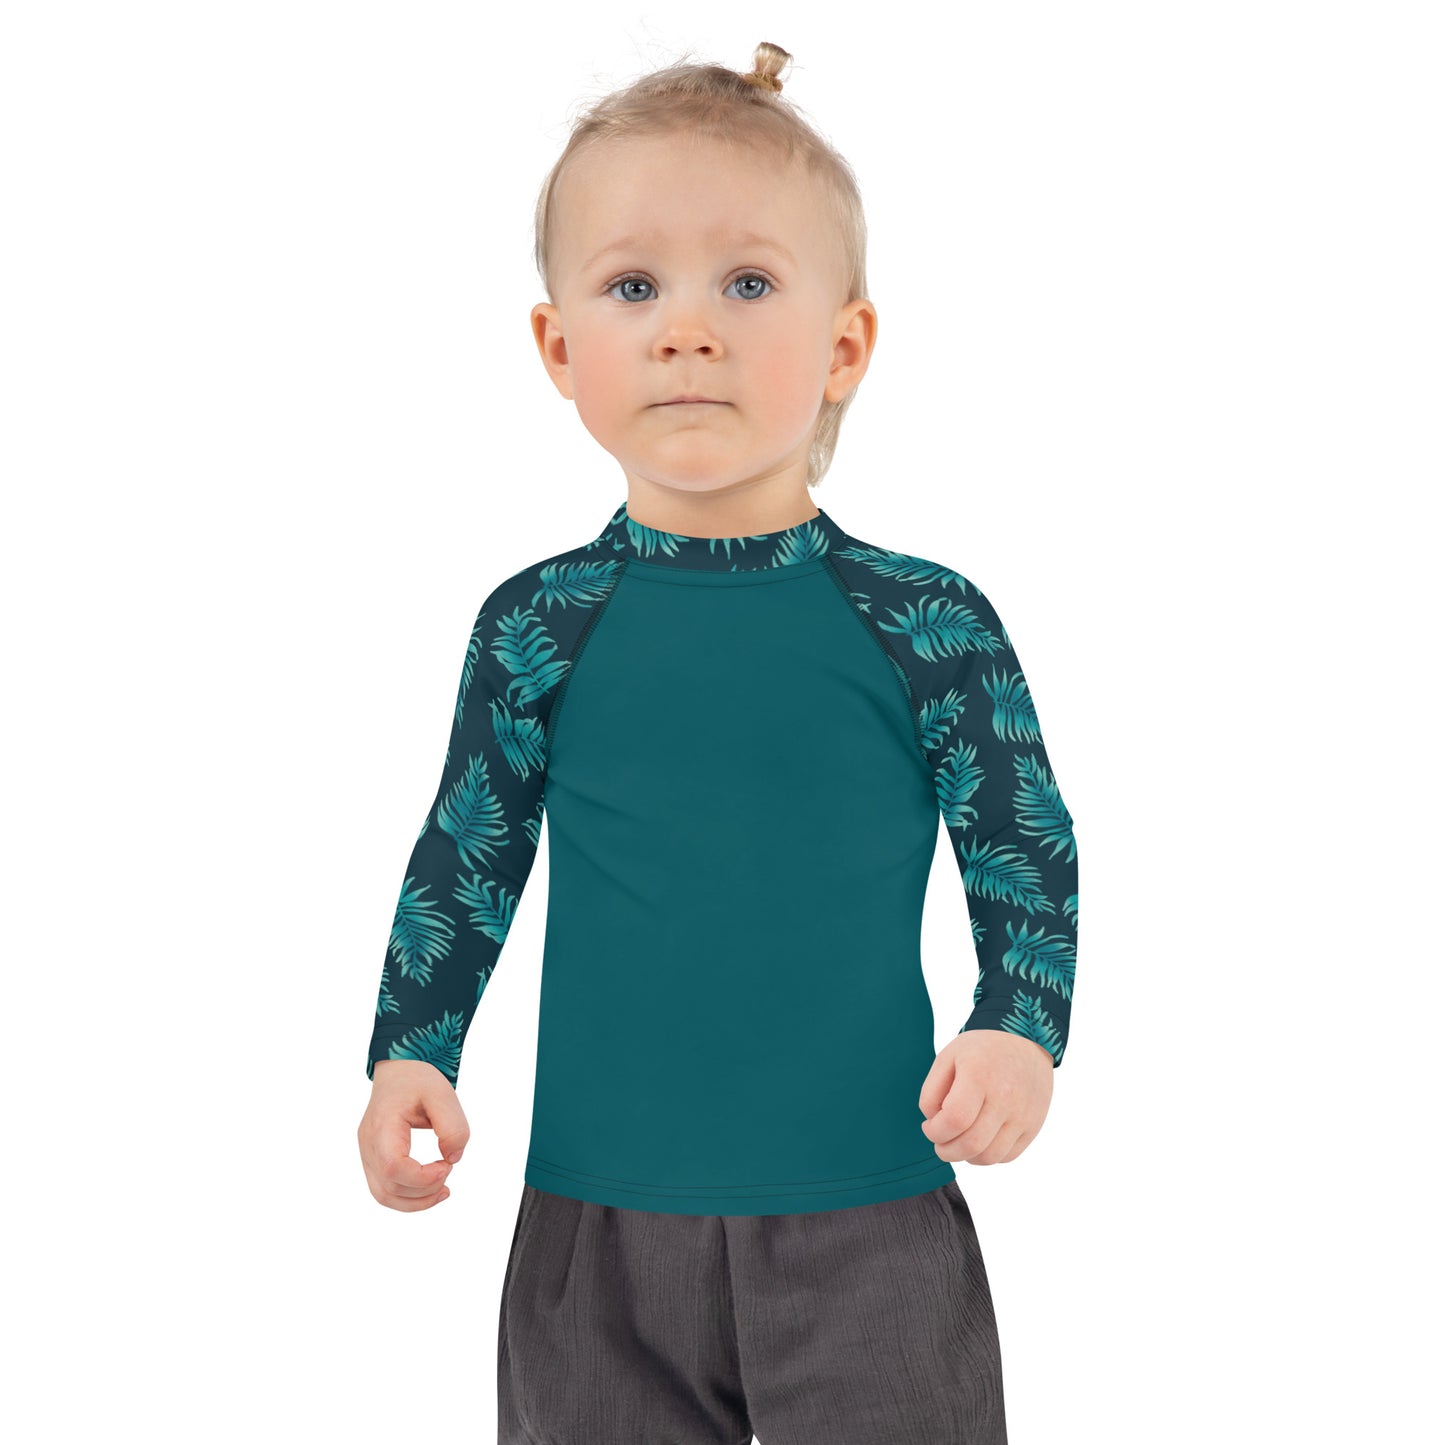 Kids Rash Guard 2T - 7 years - Palm Leaves in Blue Ombre Sleeve